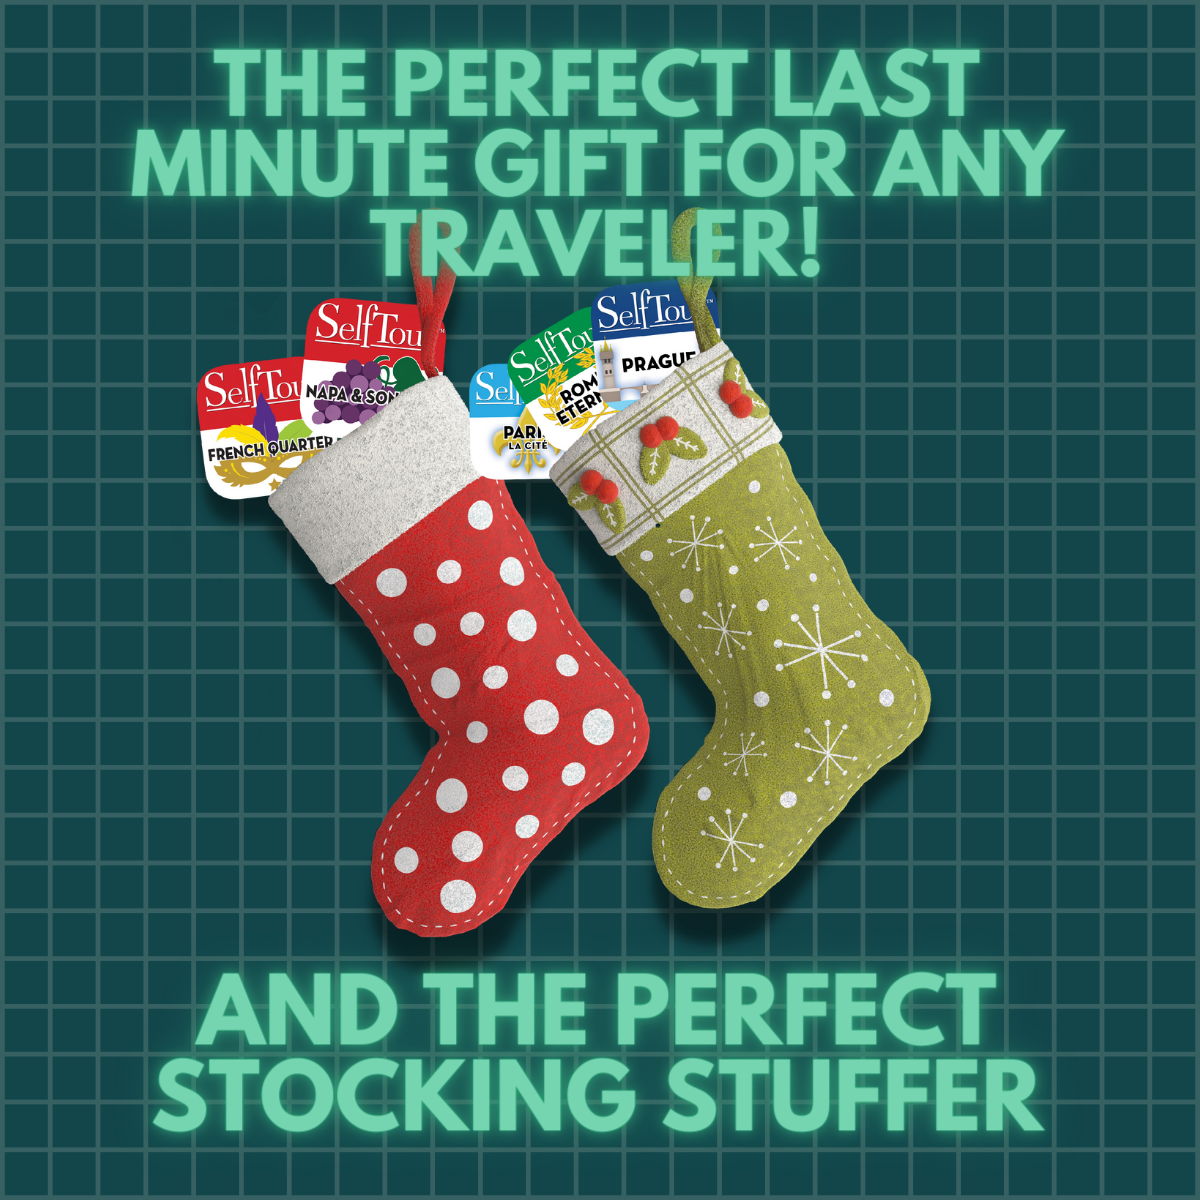 The perfect last minute gift for any traveller.